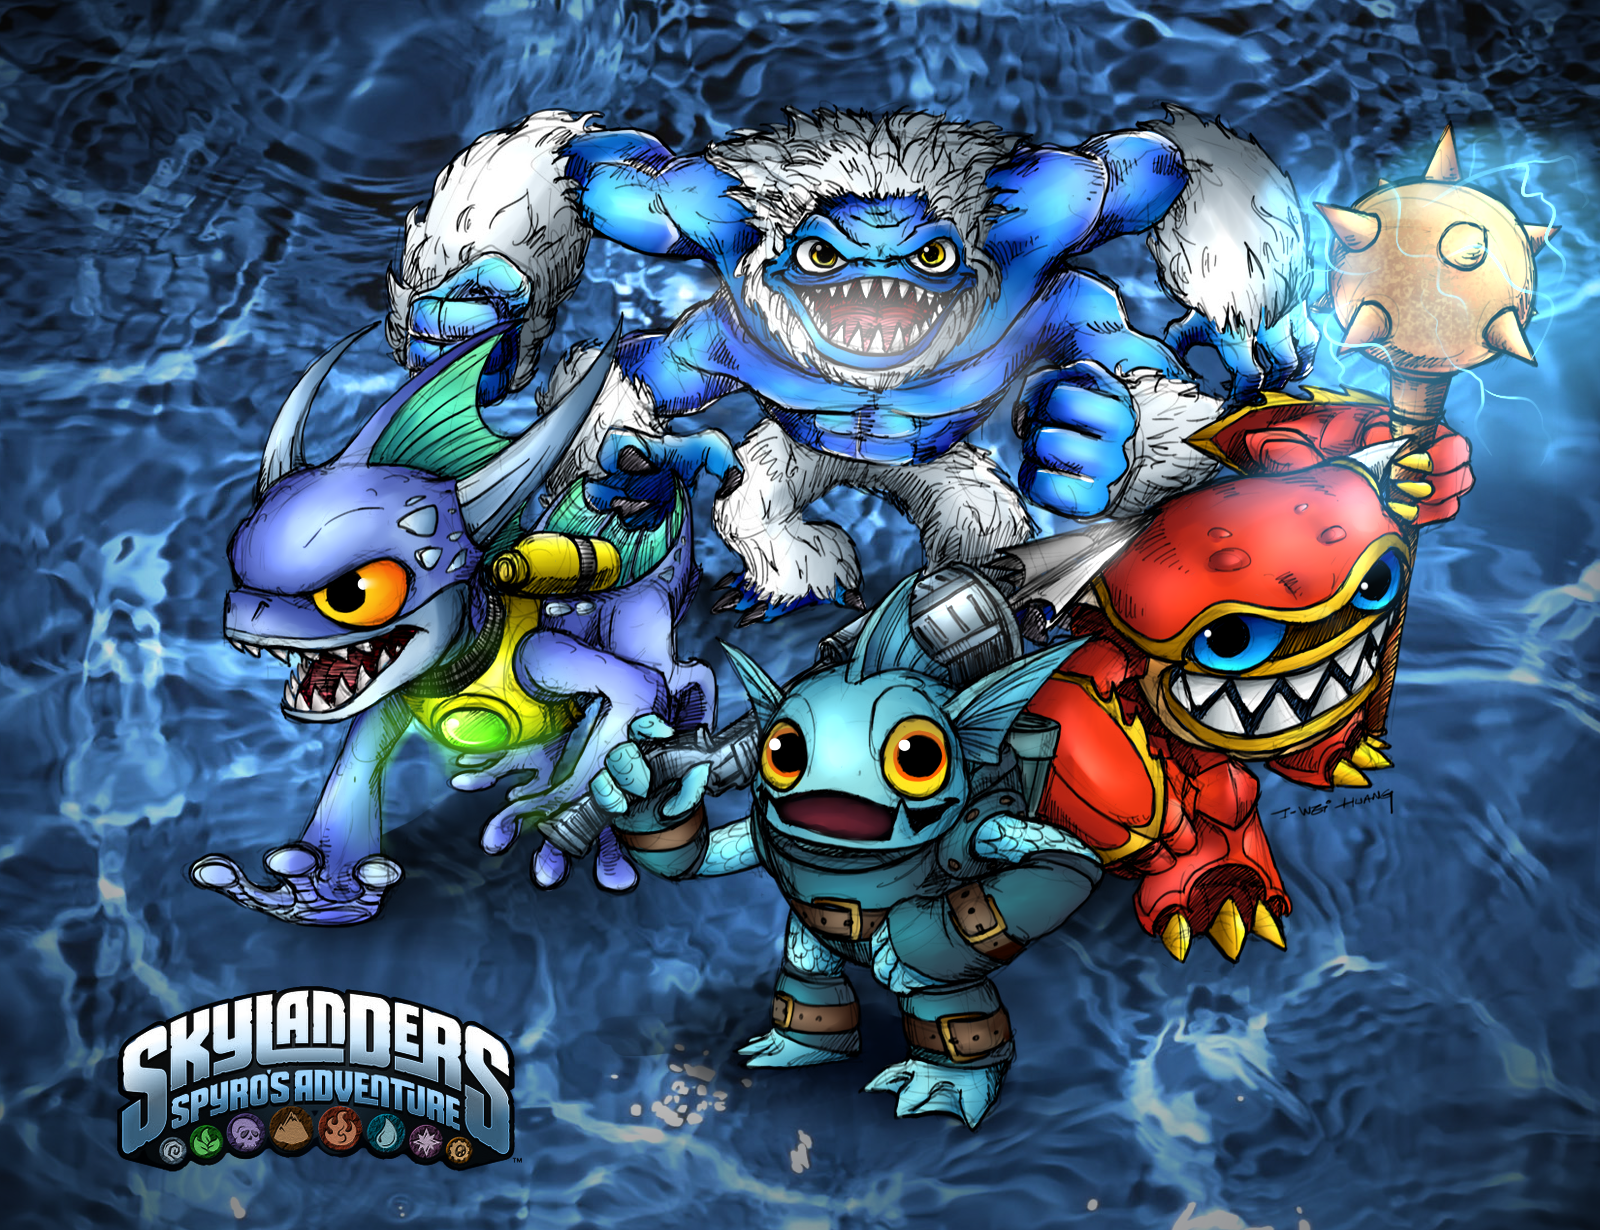 46 Skylanders Wallpaper Backgrounds On Wallpapersafari Over 40,000+ cool wallpapers to choose from. 46 skylanders wallpaper backgrounds